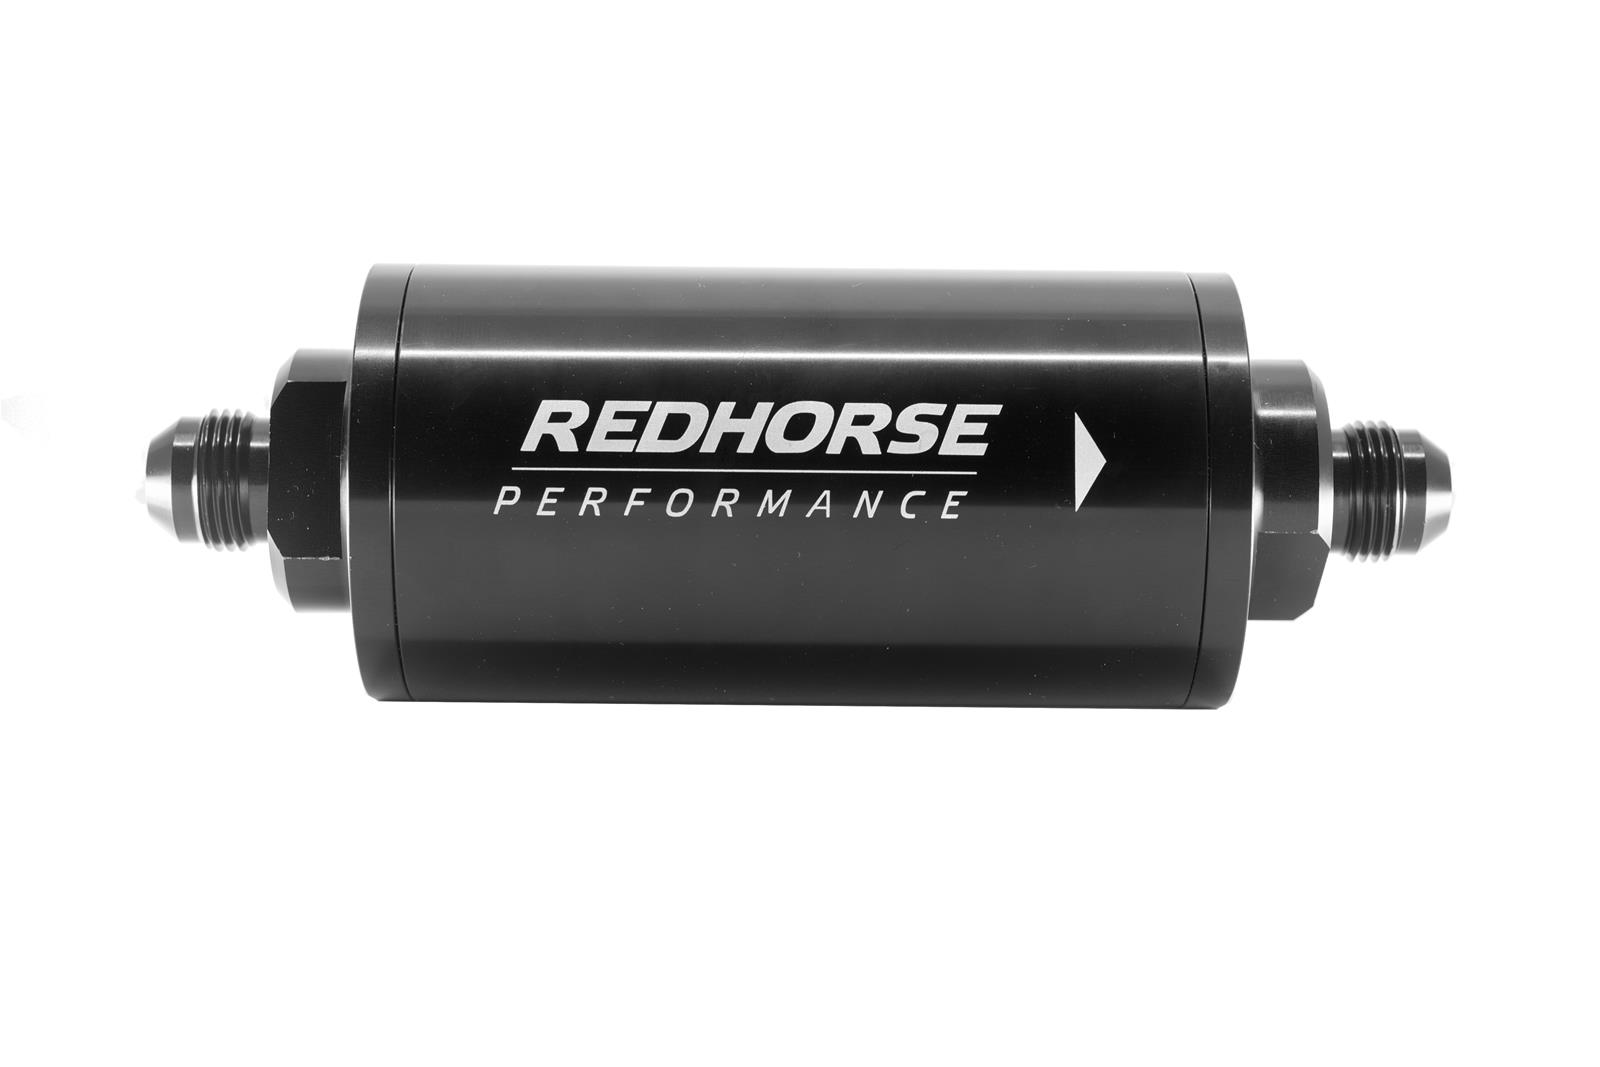 Redhorse Performance 4651-08-2-100 6in Cylindrical In-Line Race Fuel Filter w/ 100 Micron S.S. element - 08 AN